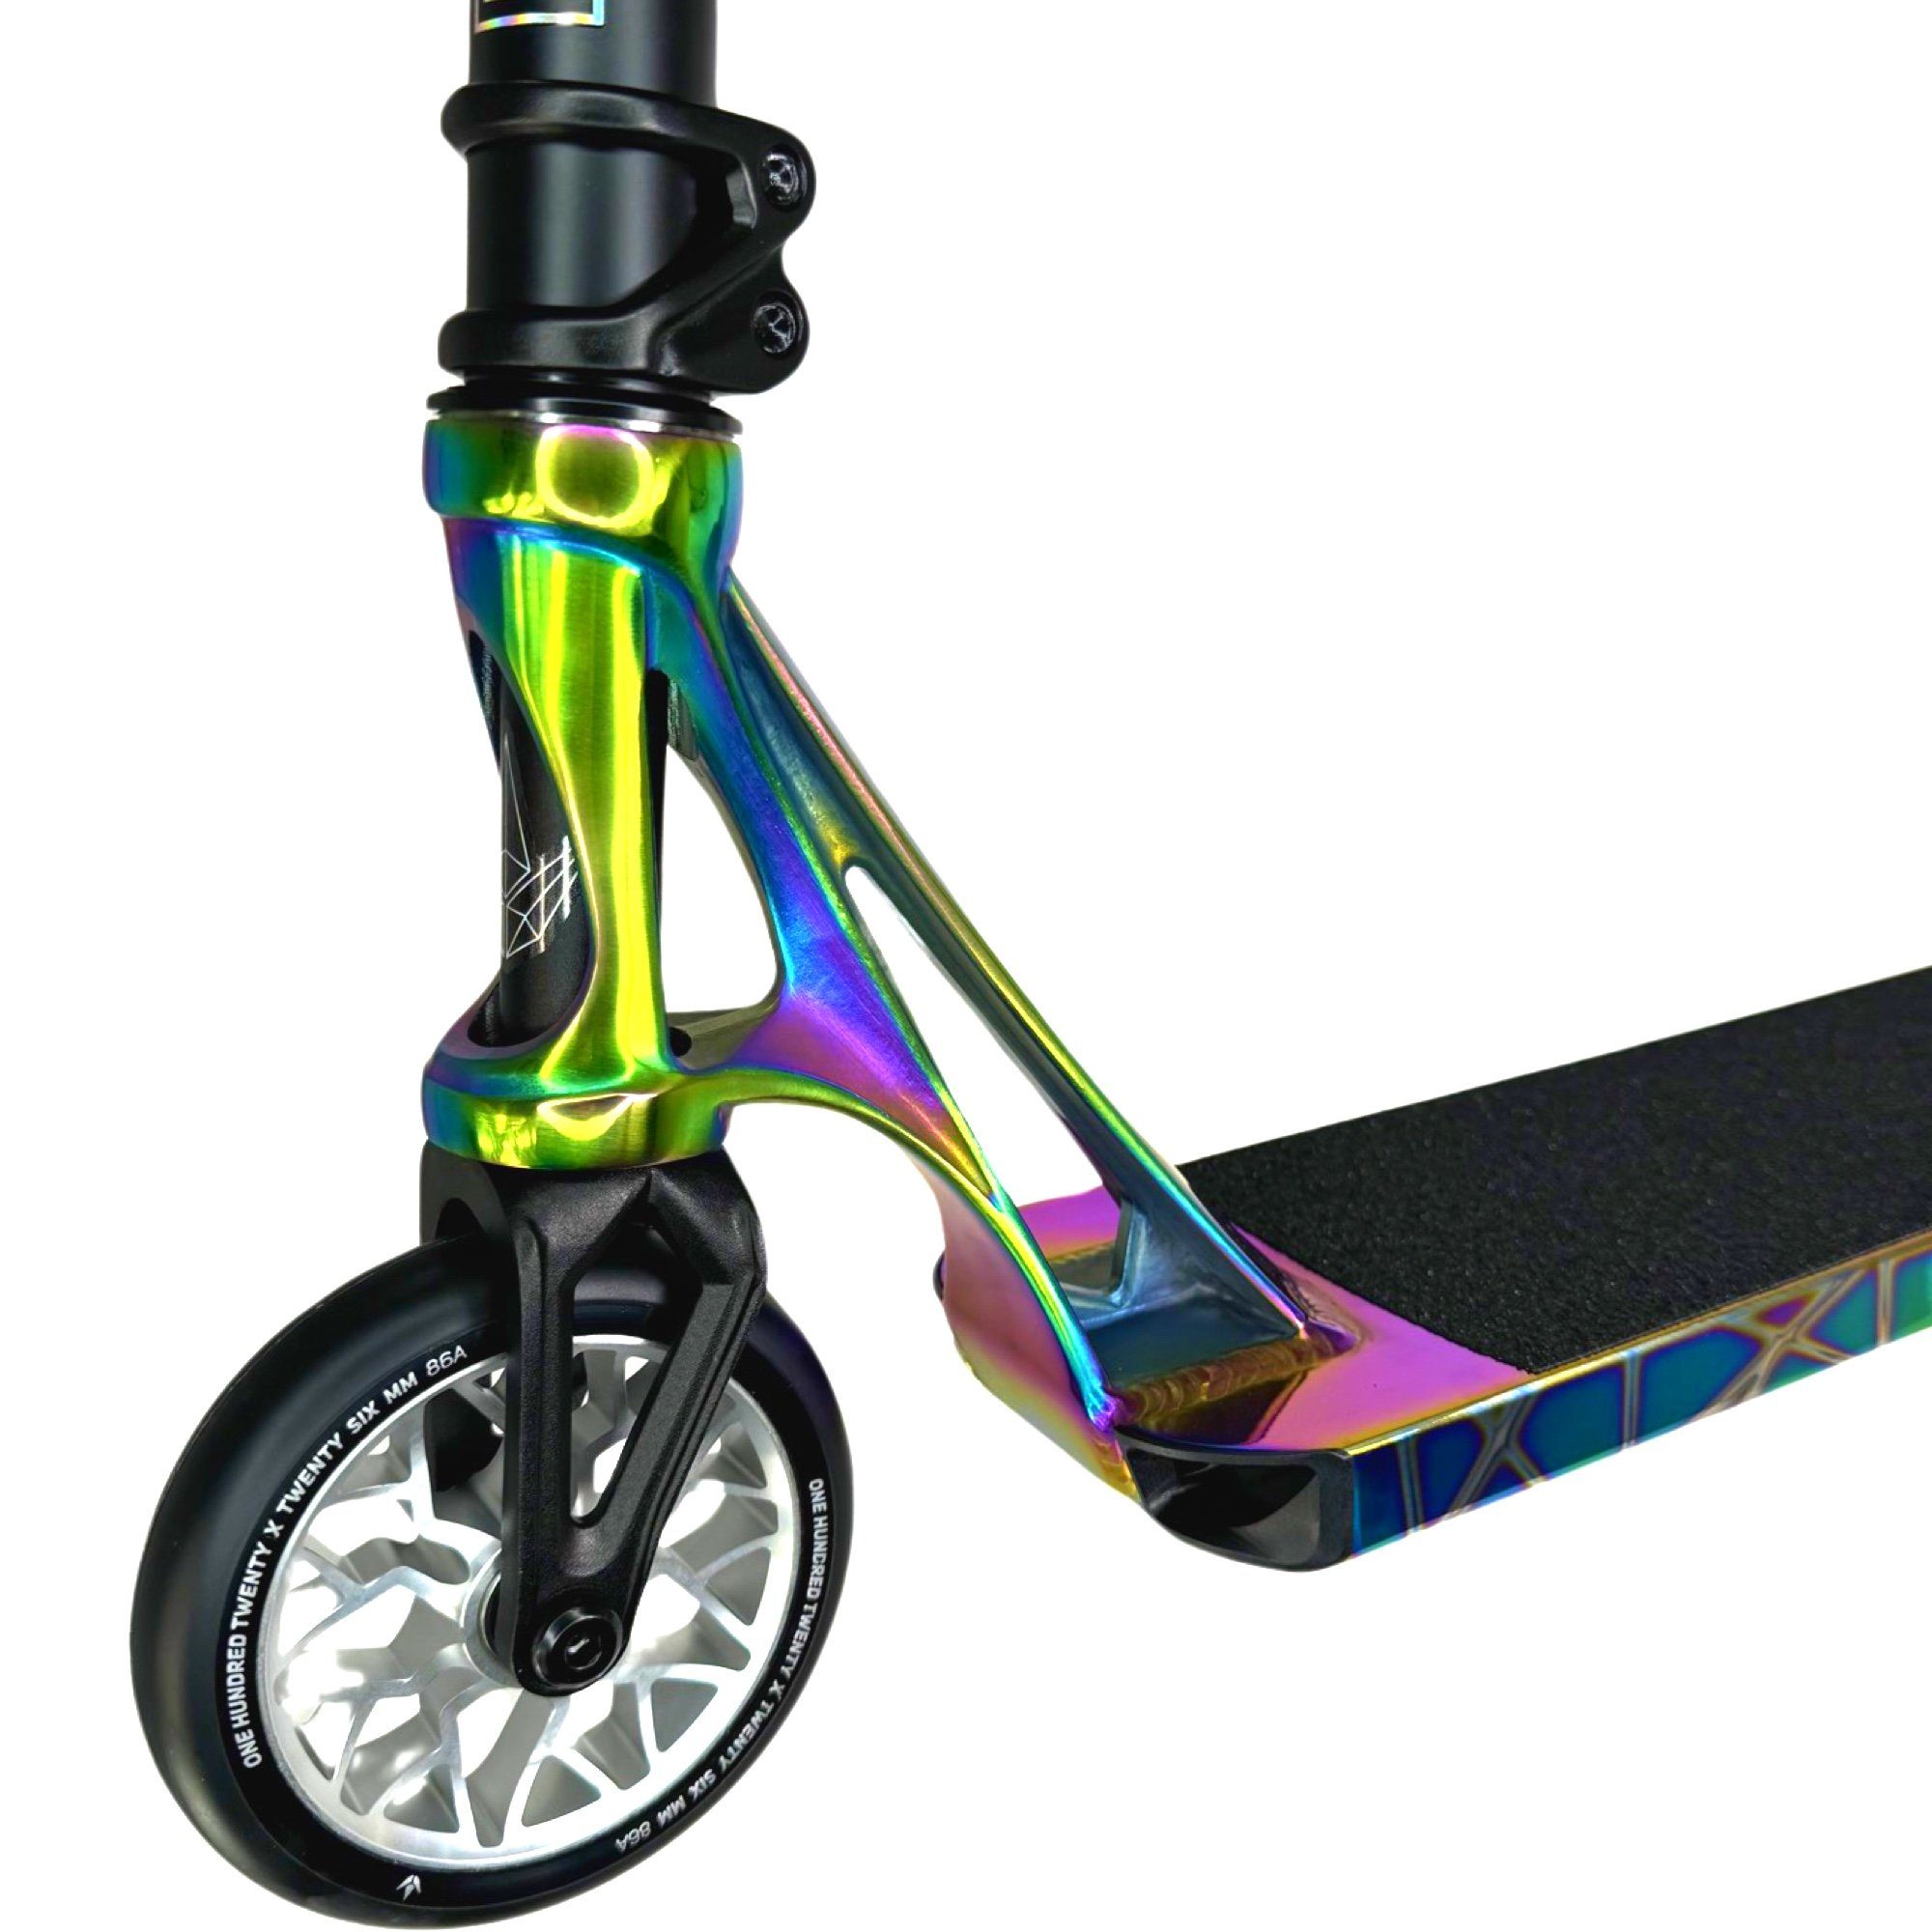 Prodigy Blunt Park Blunt Stuntscooter X H=86cm Complete Neochrome Stunt-Scooter